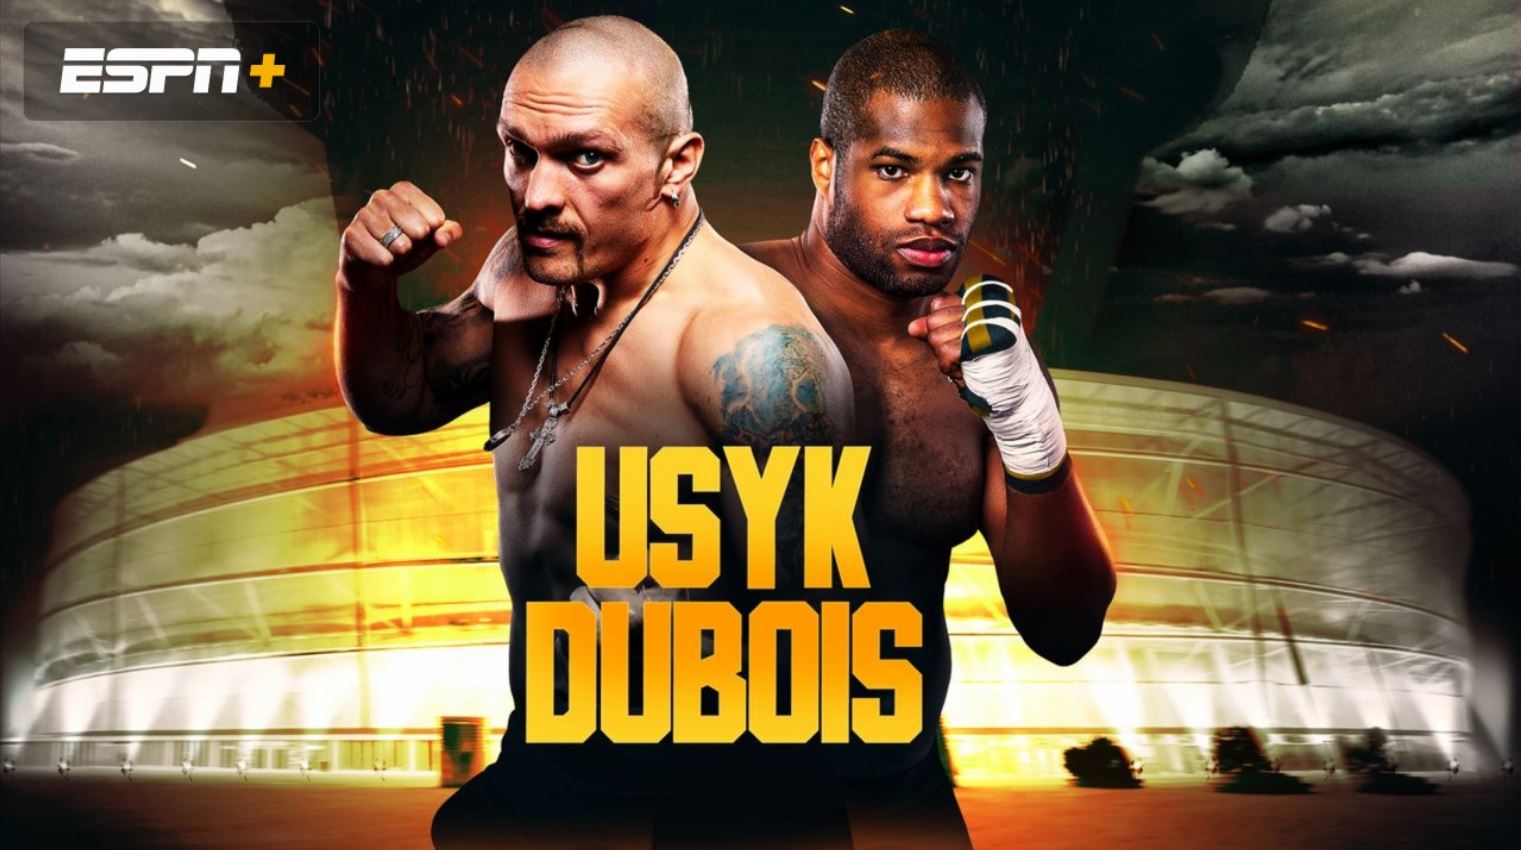 Usyk and Dubois square up in a promotional poster.